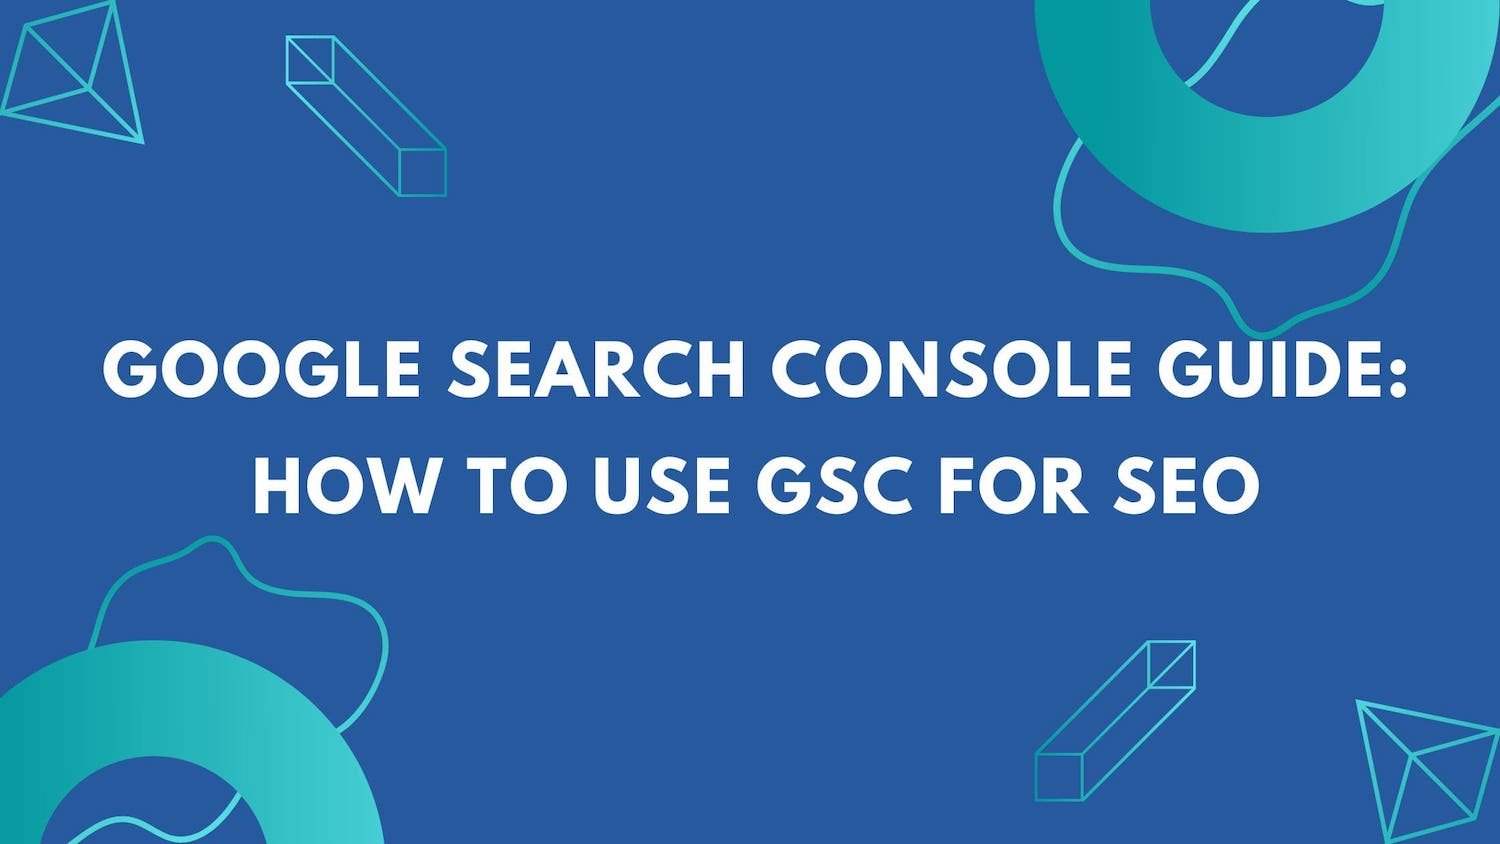 Google Search Console guide How to use GSC for SEO [2022]